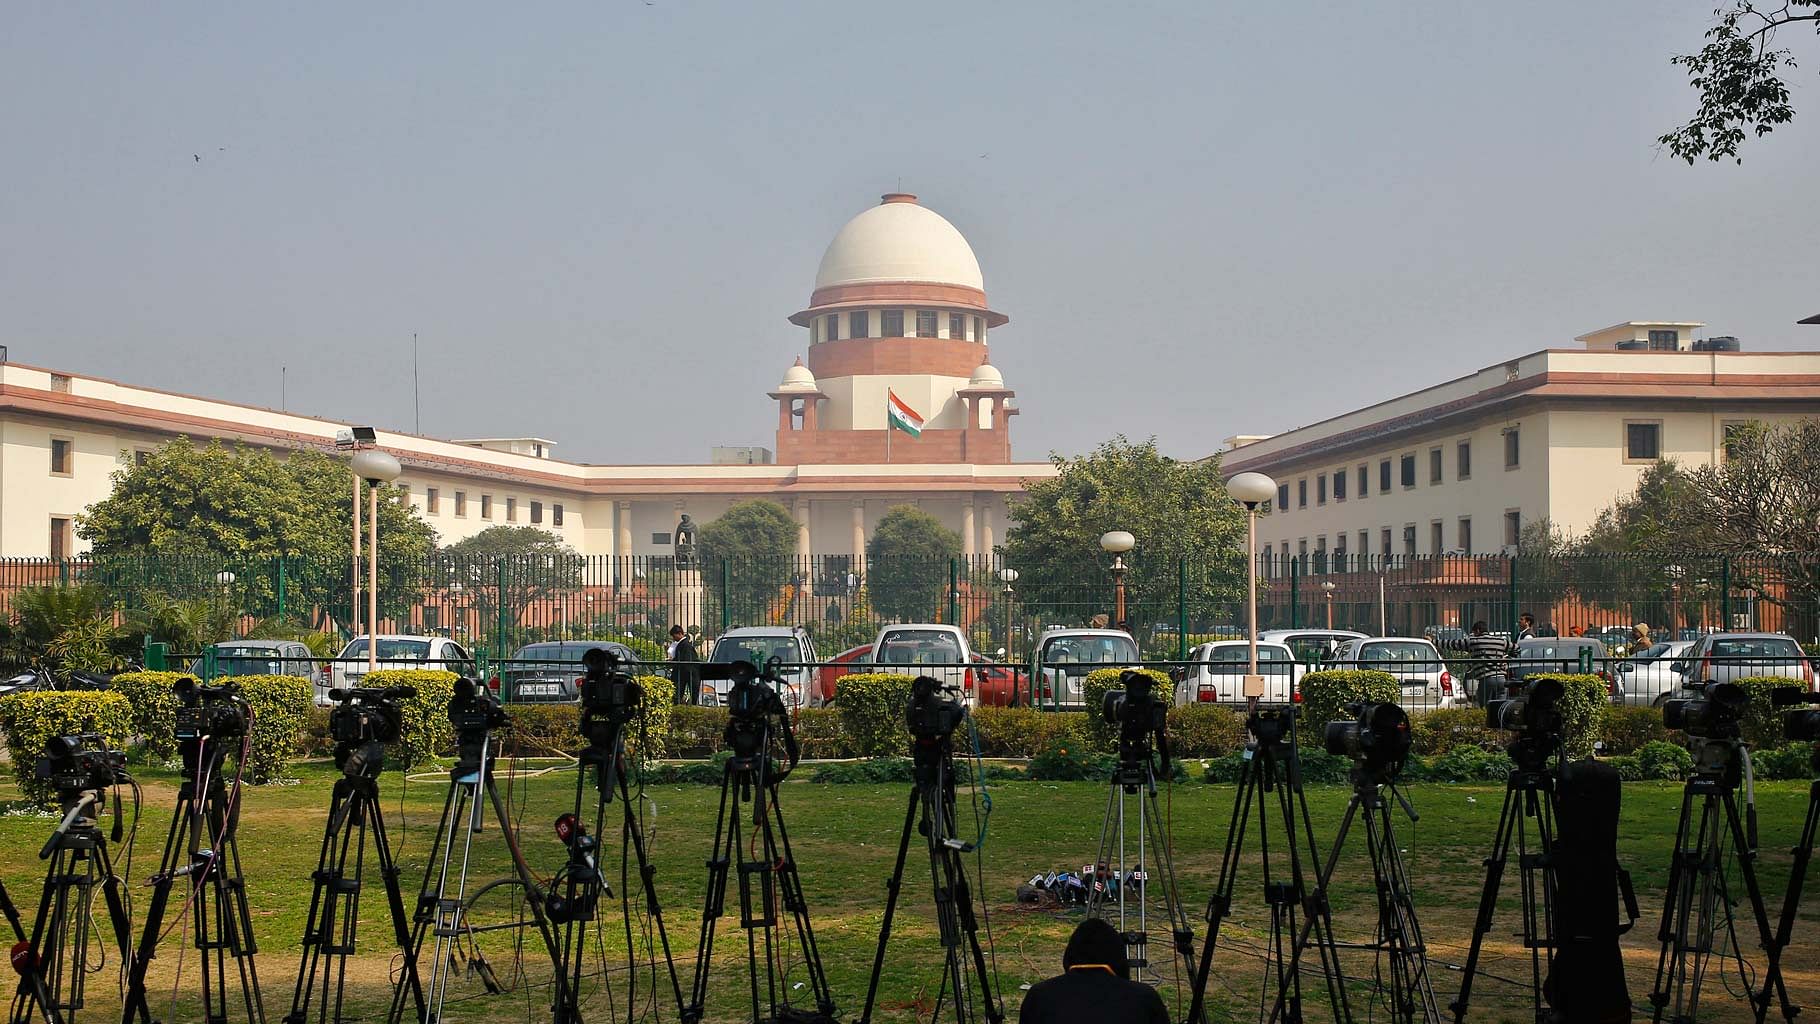 Any delay in filling up the positions might adversely impact children and this should be avoided, the SC bench said.